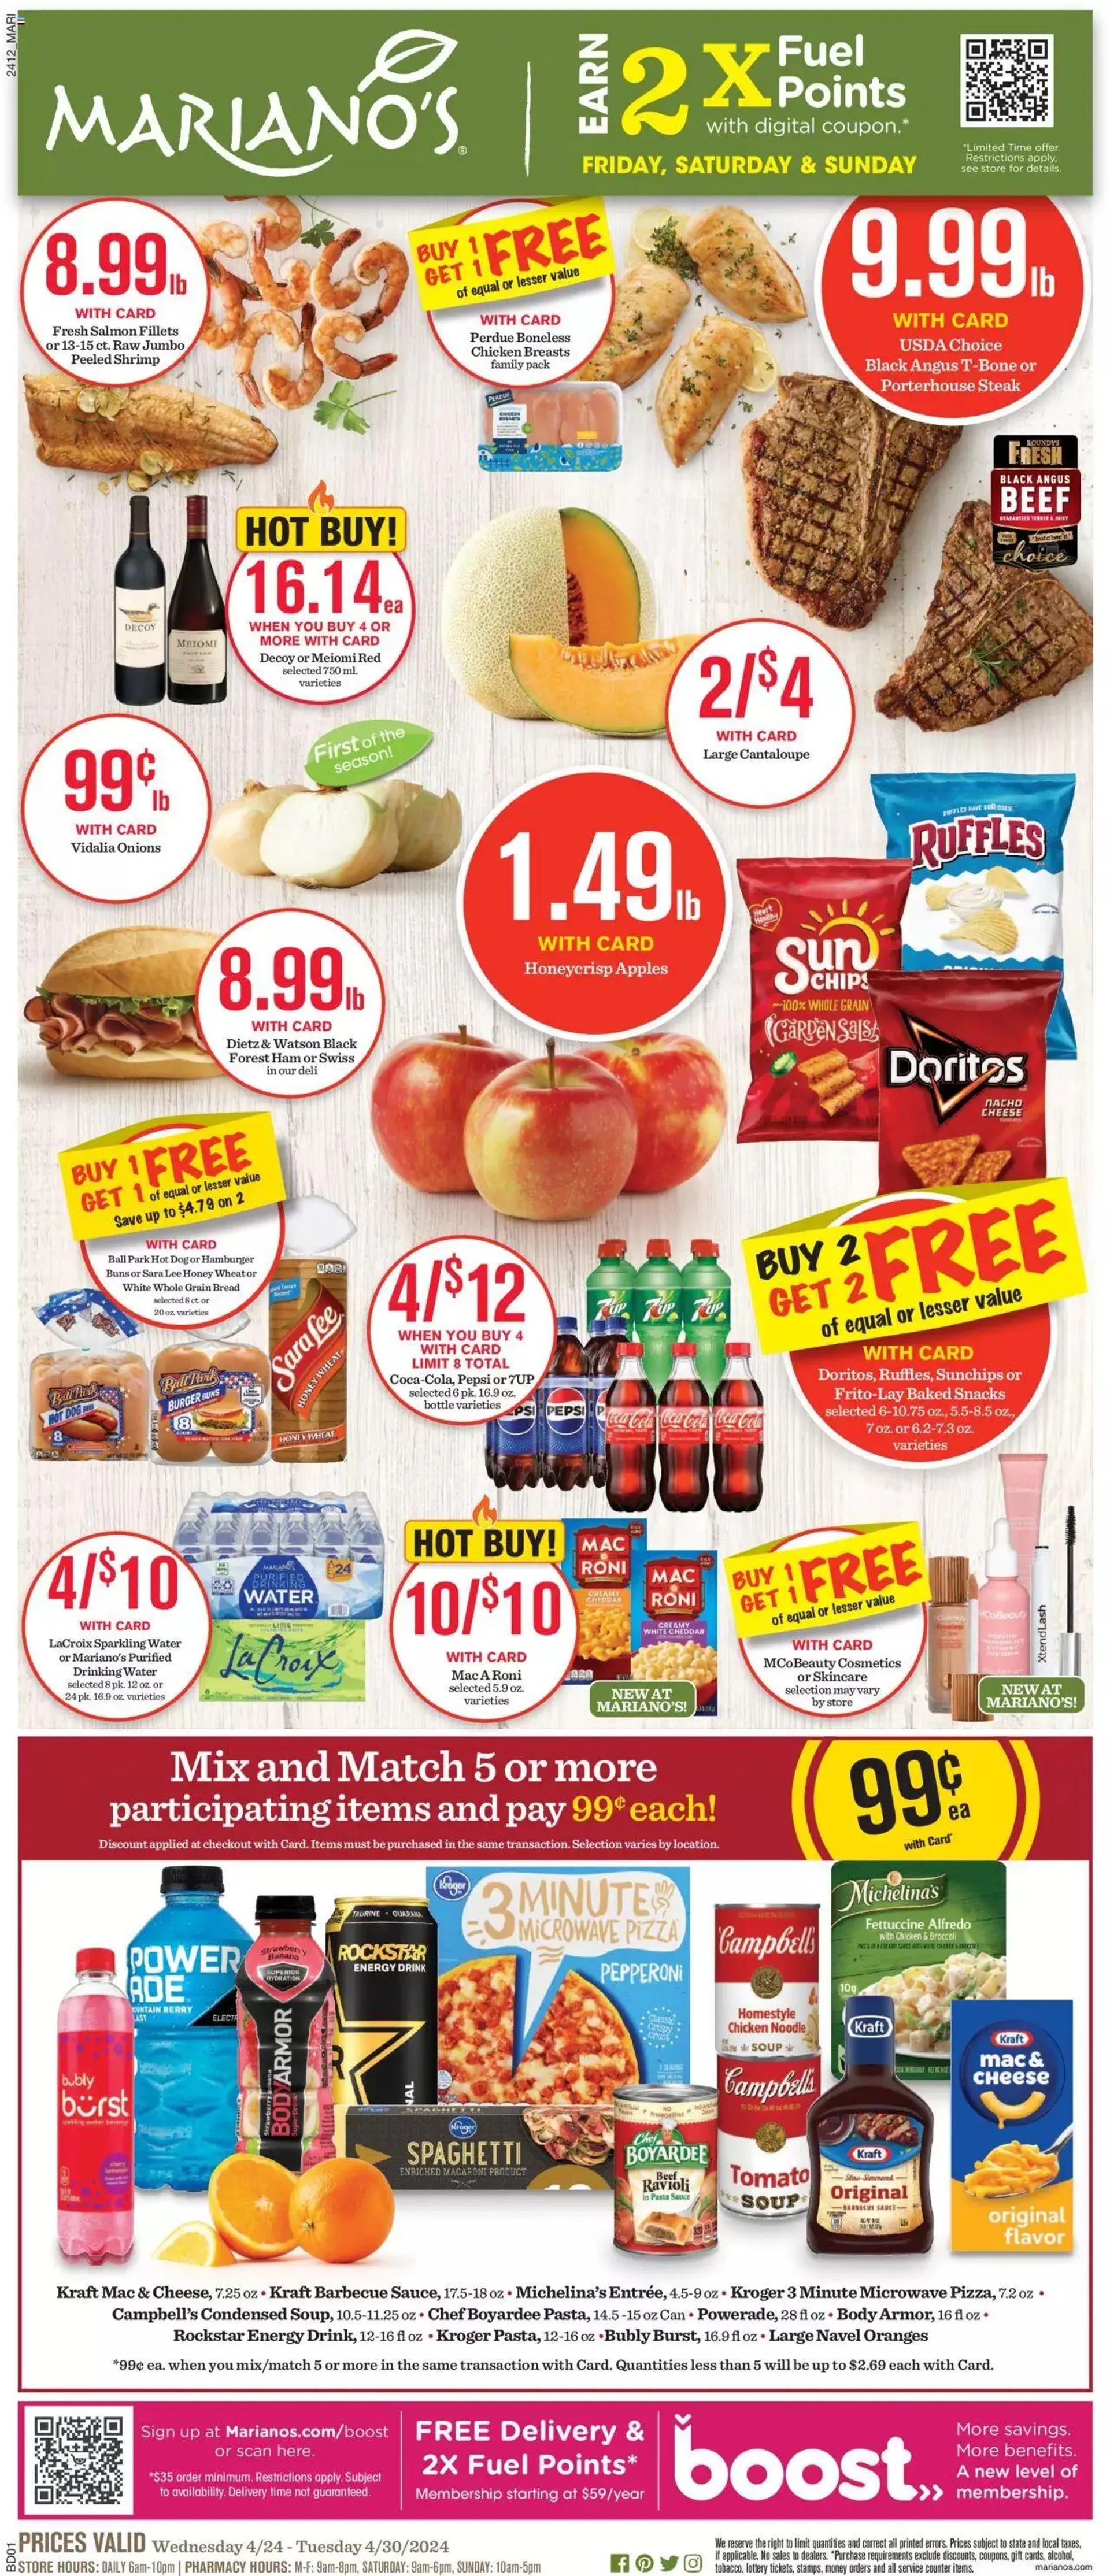 Marianos - Weekly Ad - IL - 0